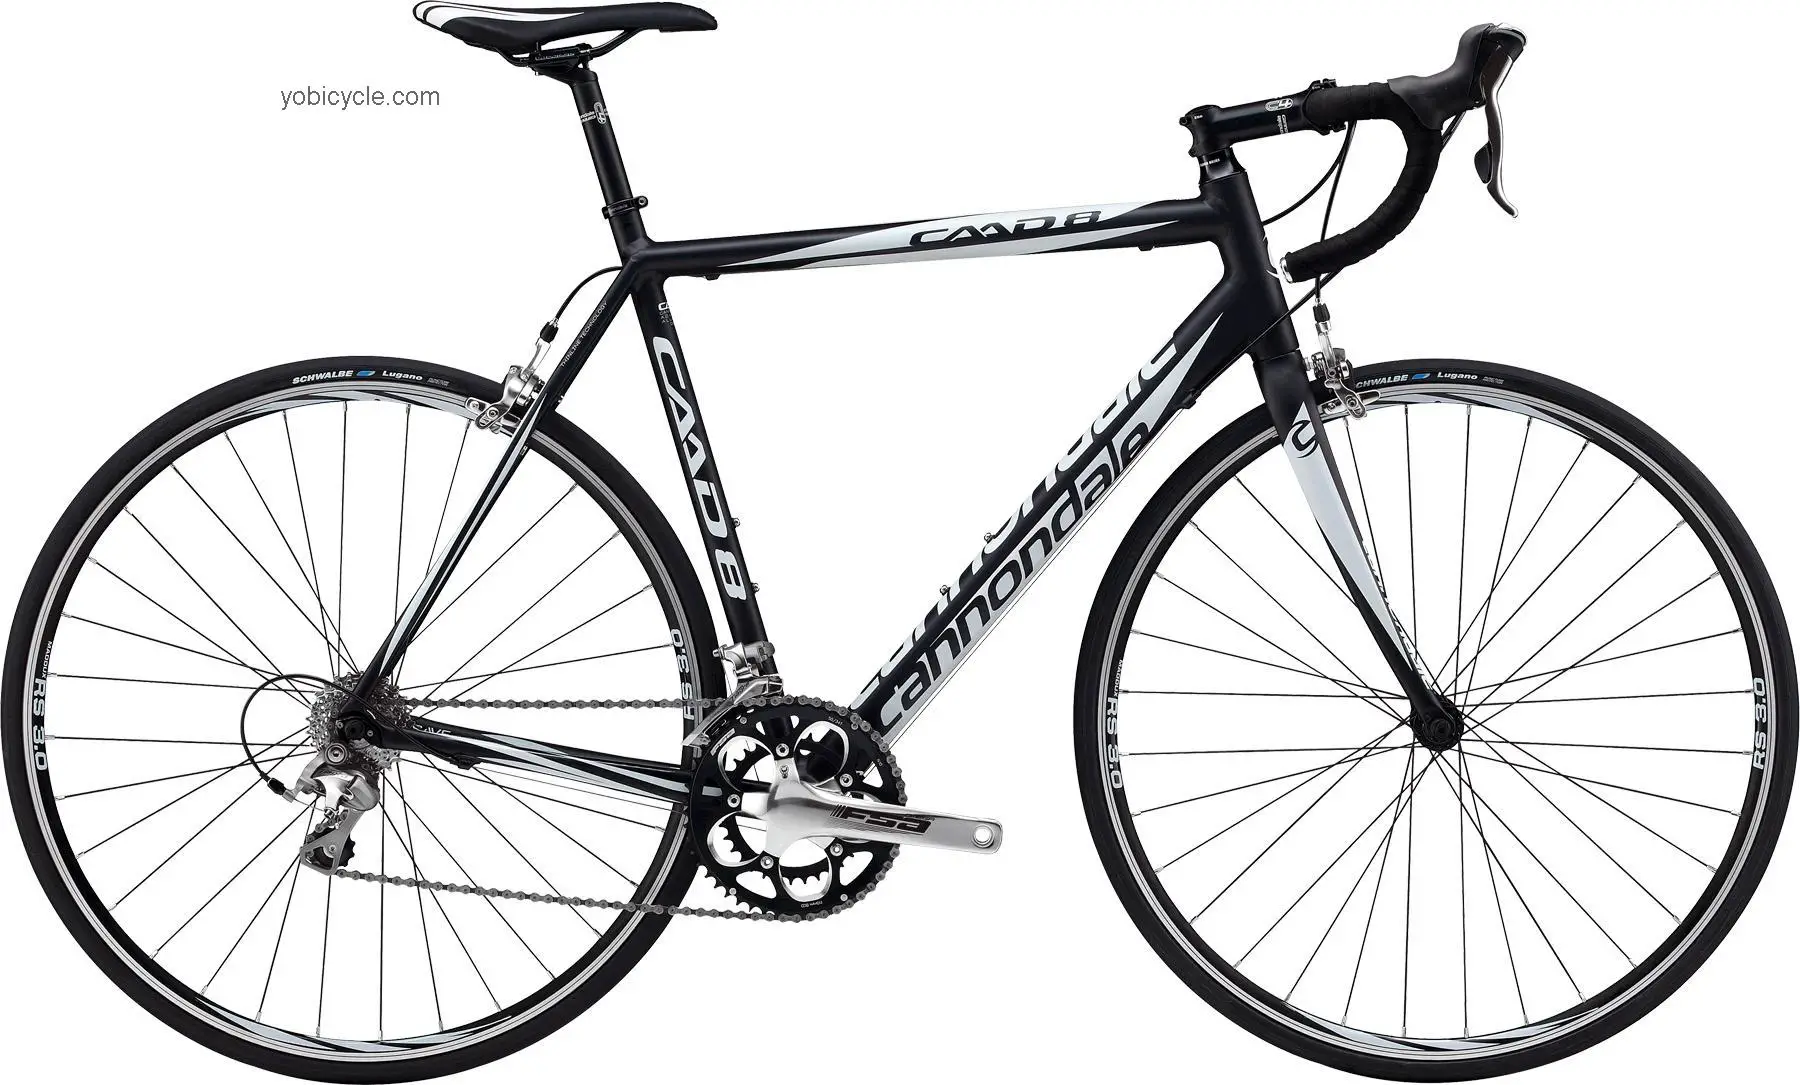 Cannondale CAAD8 6 Tiagra 2012 comparison online with competitors